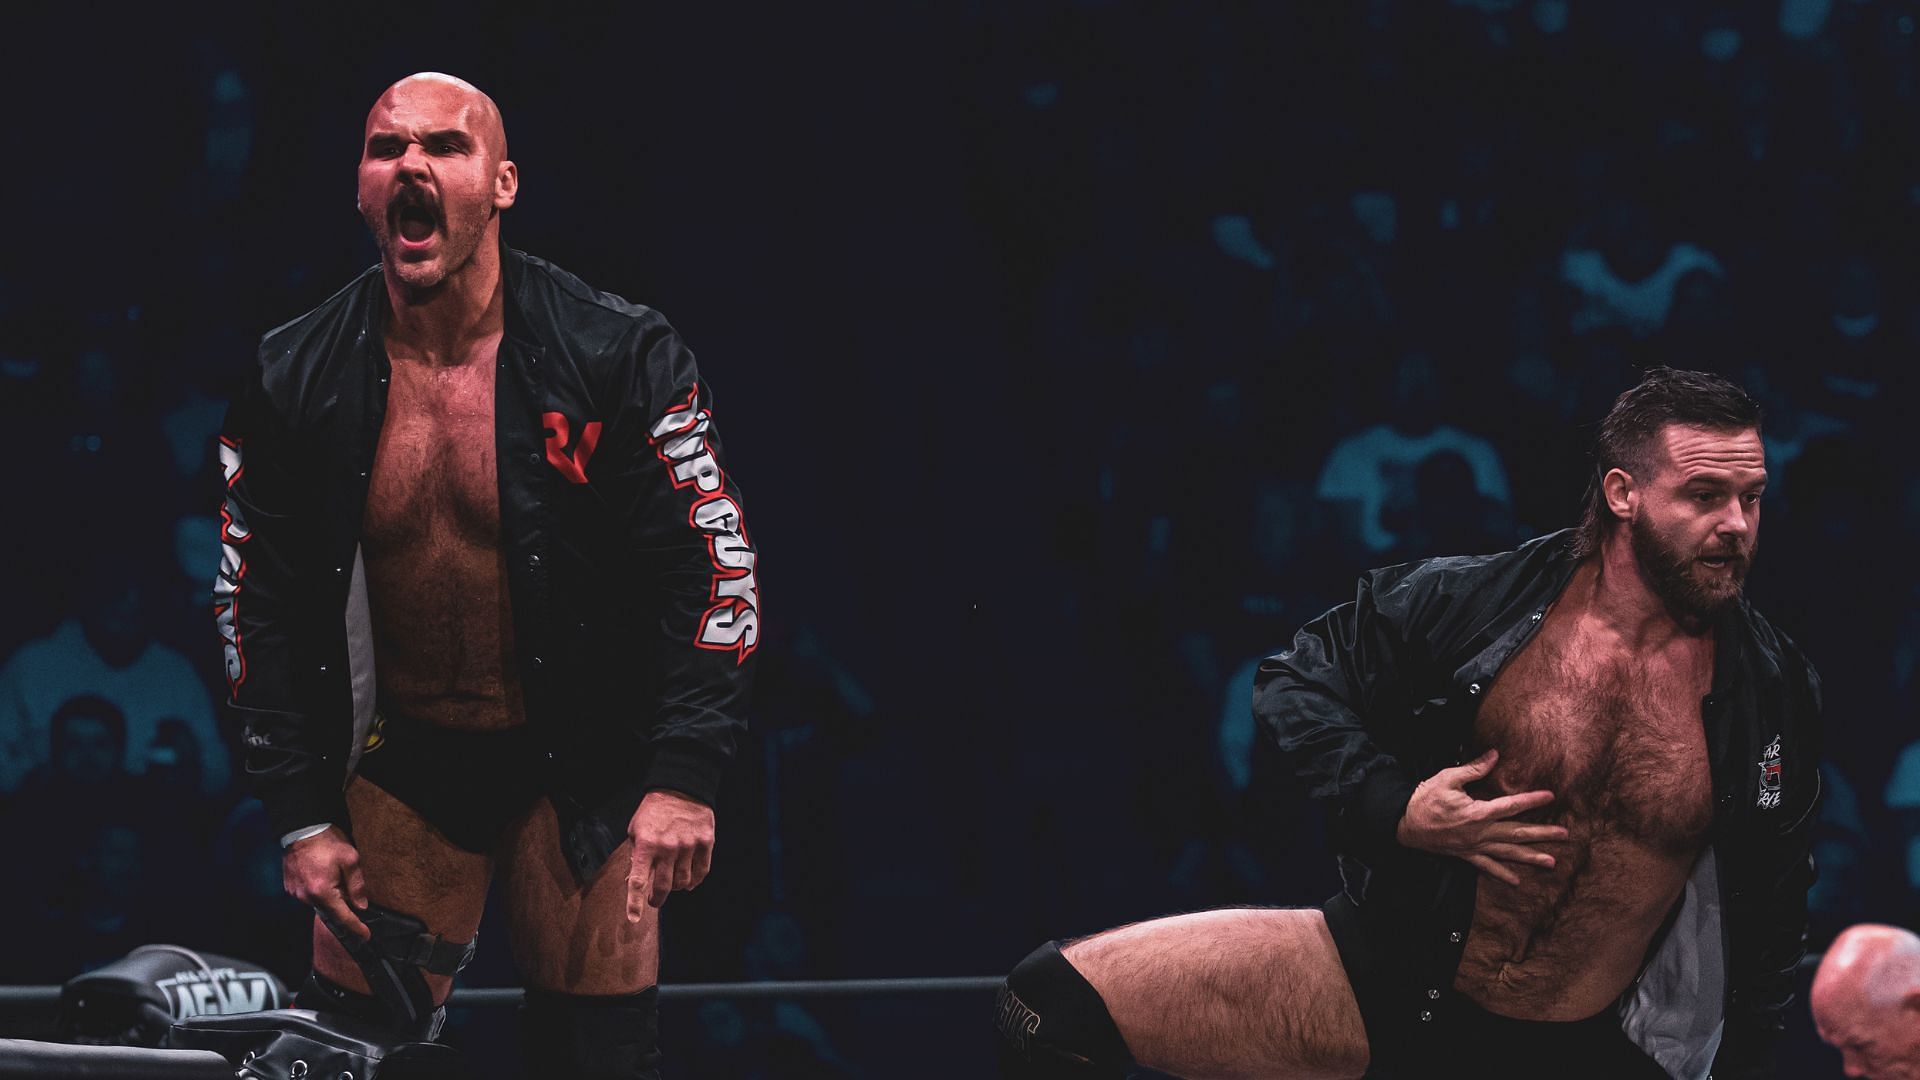 FTR at an AEW Dynamite event in 2022 (Credit: Jay Lee Photography)